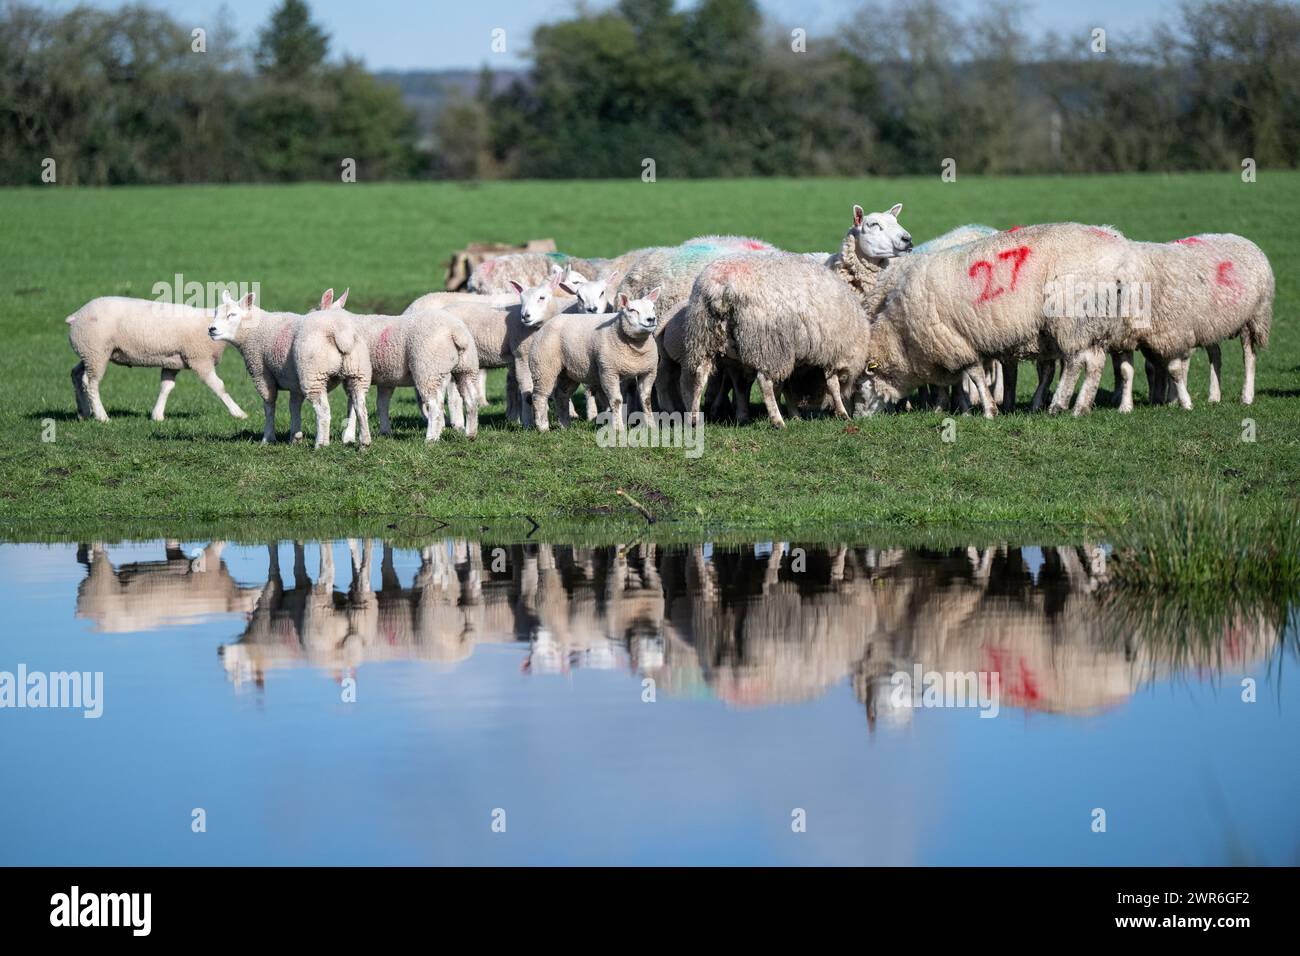 Flock of commercial ewes with Beltex sired lambs grazing on a raised bank, reflected in a pond. Shrewsbury, UK. Stock Photo